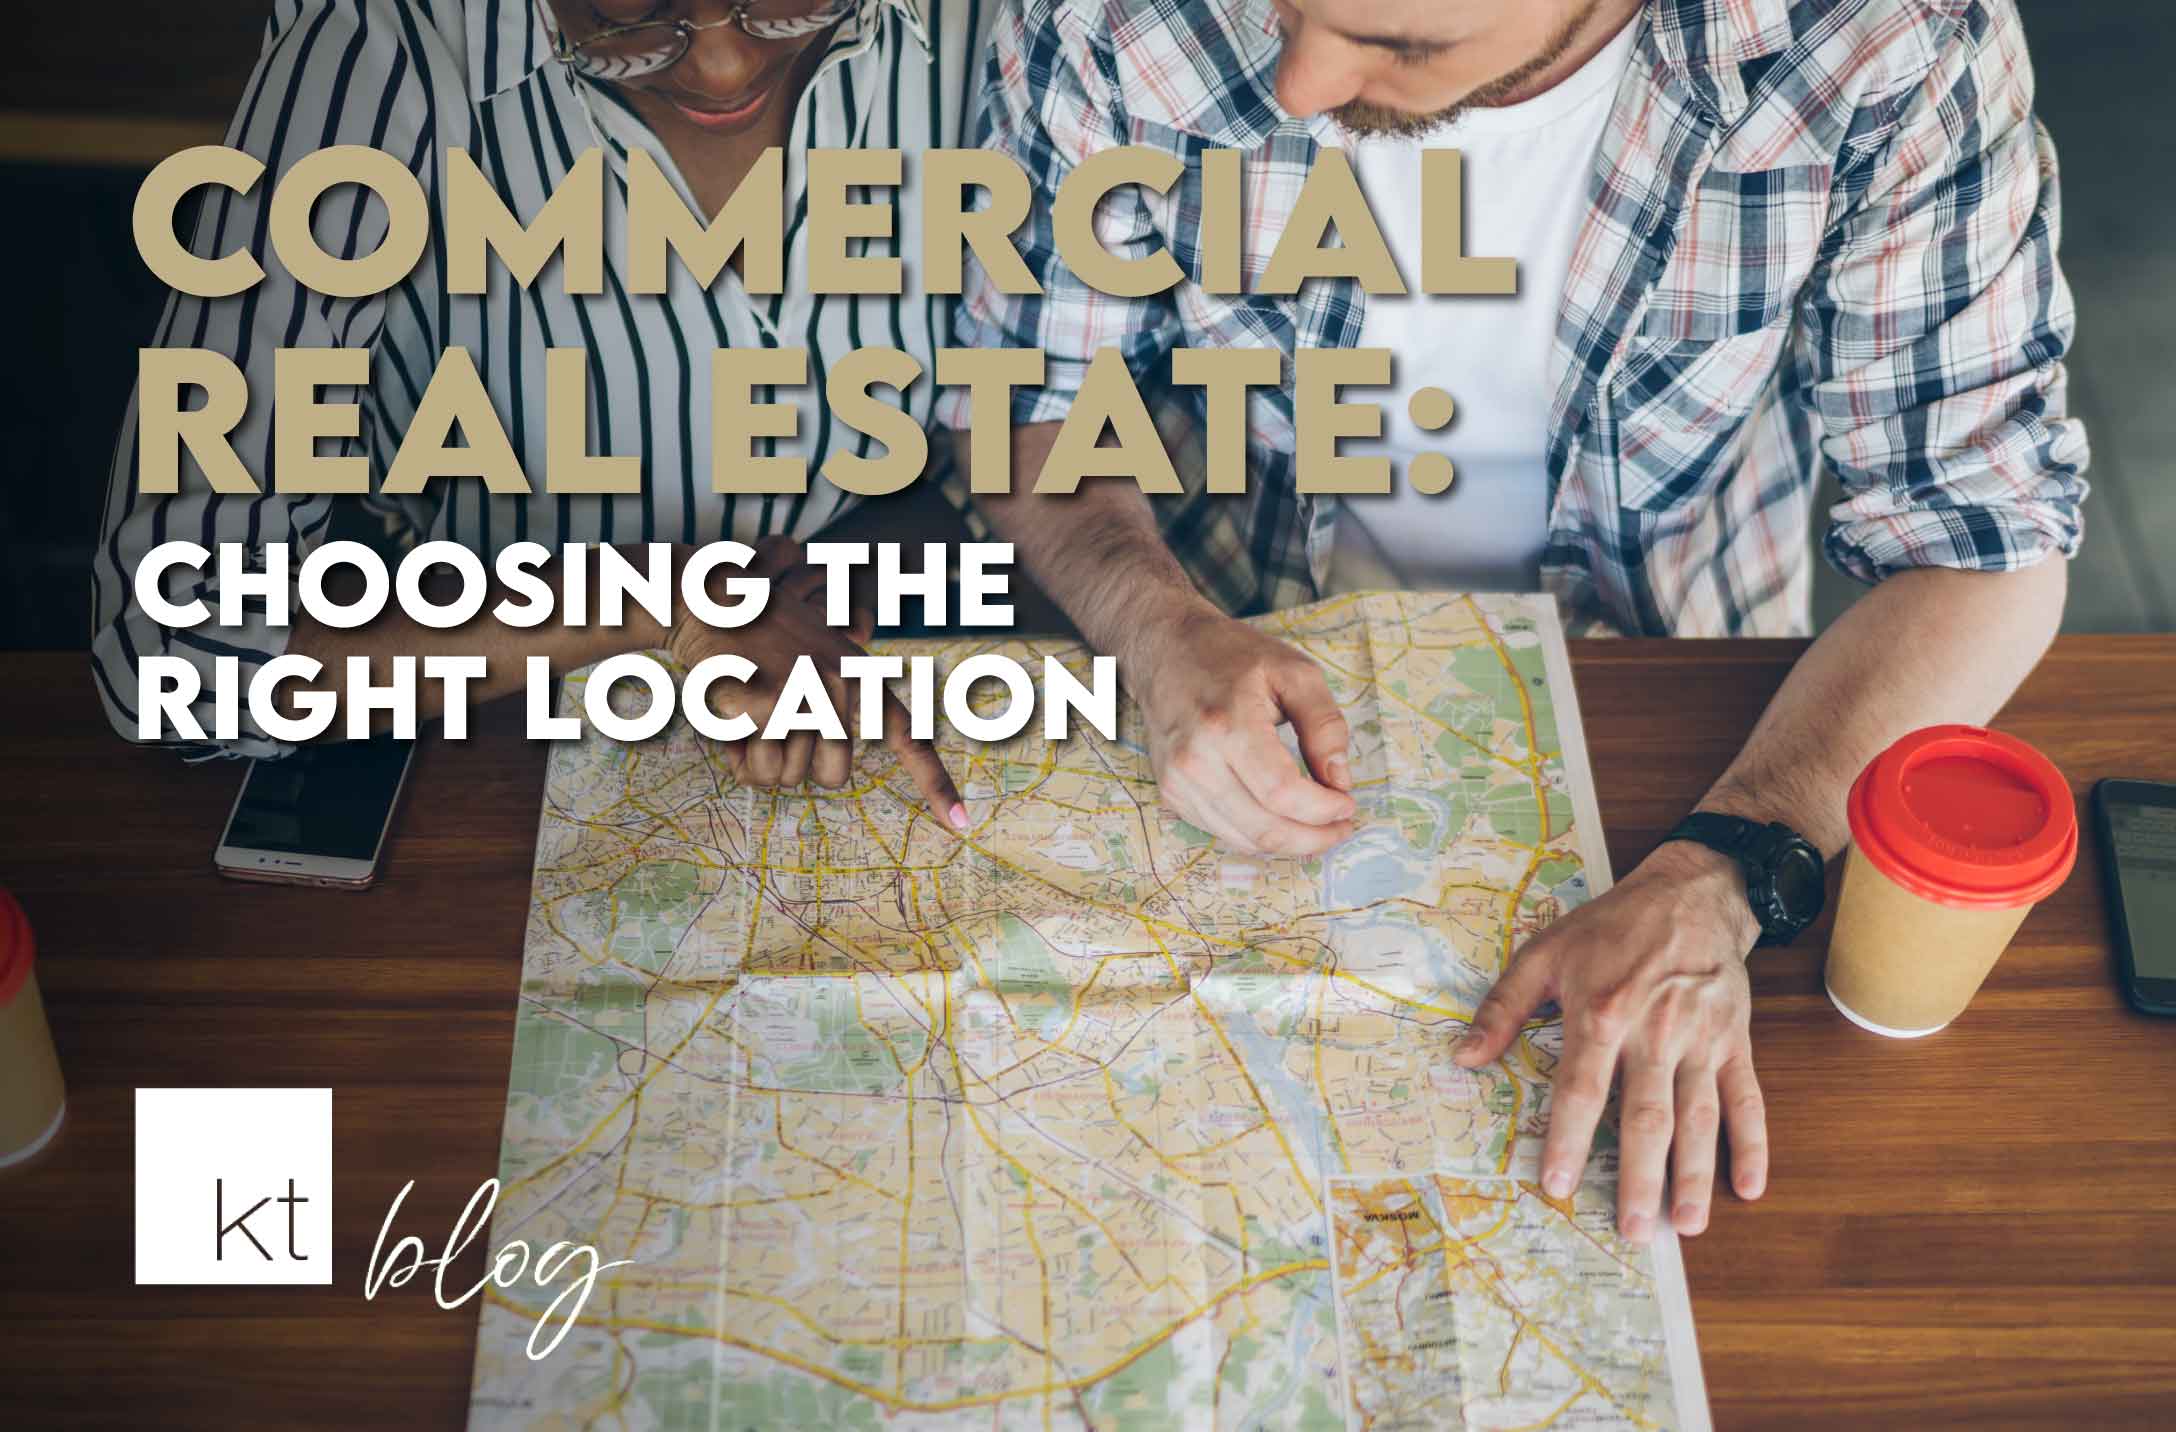 Professional couple looking at a map for the location of buying commercial real estate